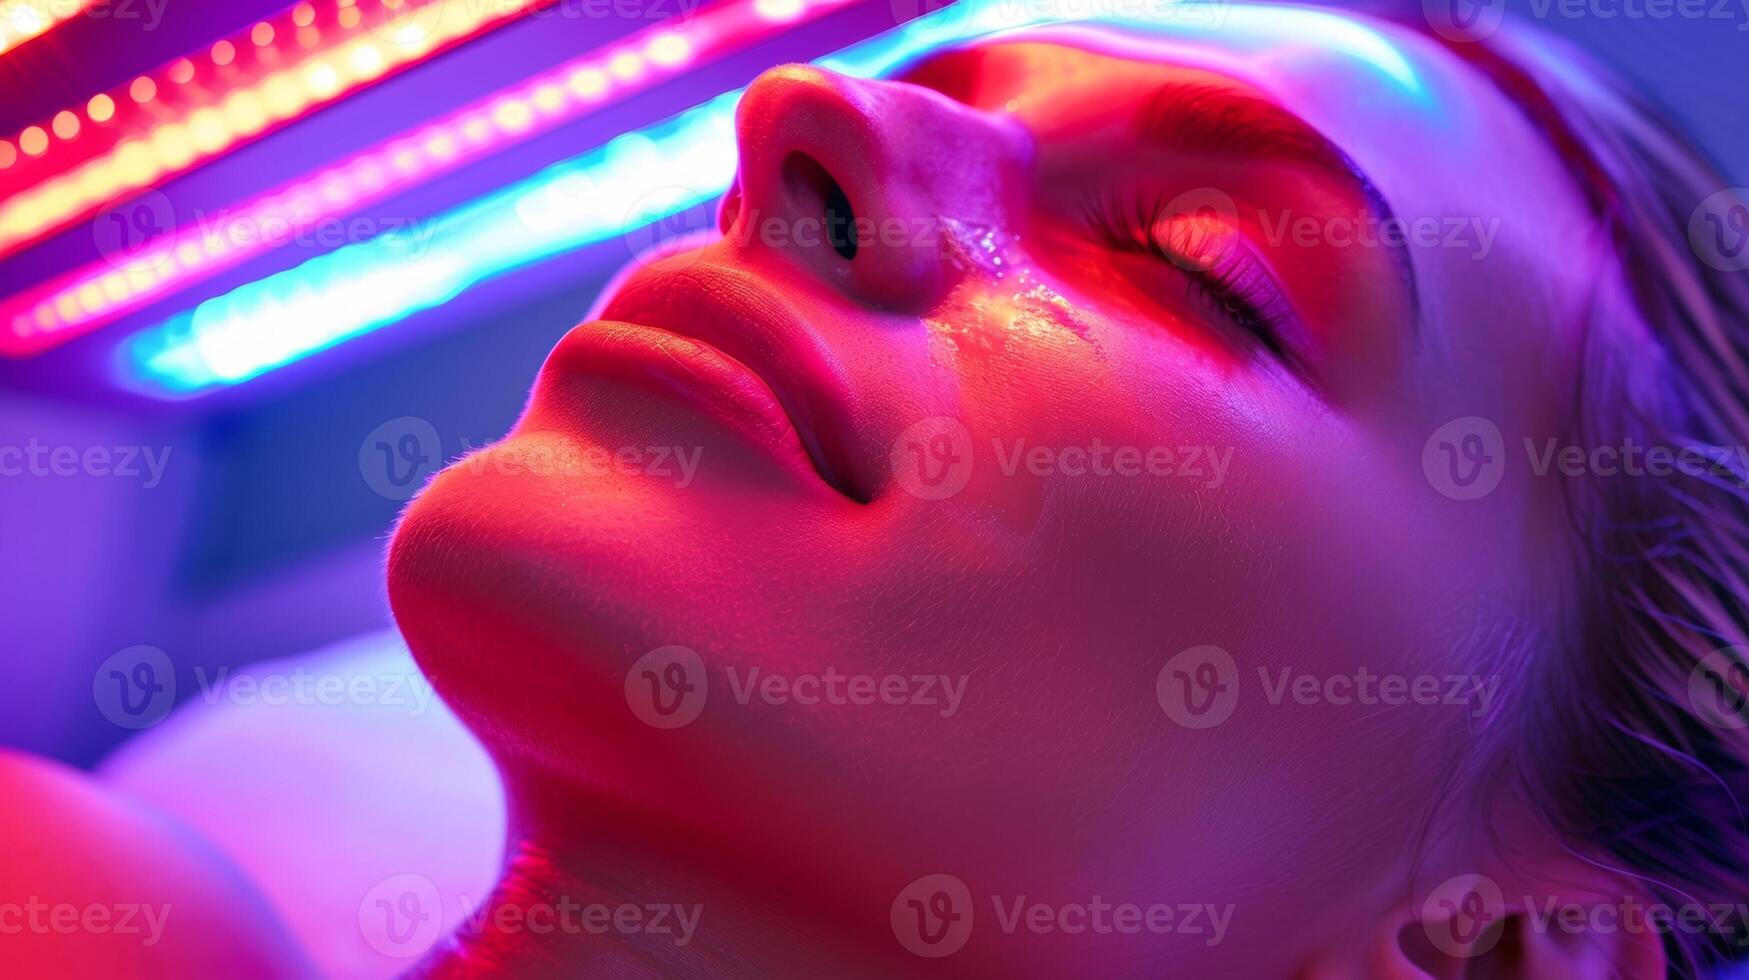 She can feel the sweat starting to trickle down her forehead as the infrared lights work their magic detoxifying her body and boosting her immune system. photo